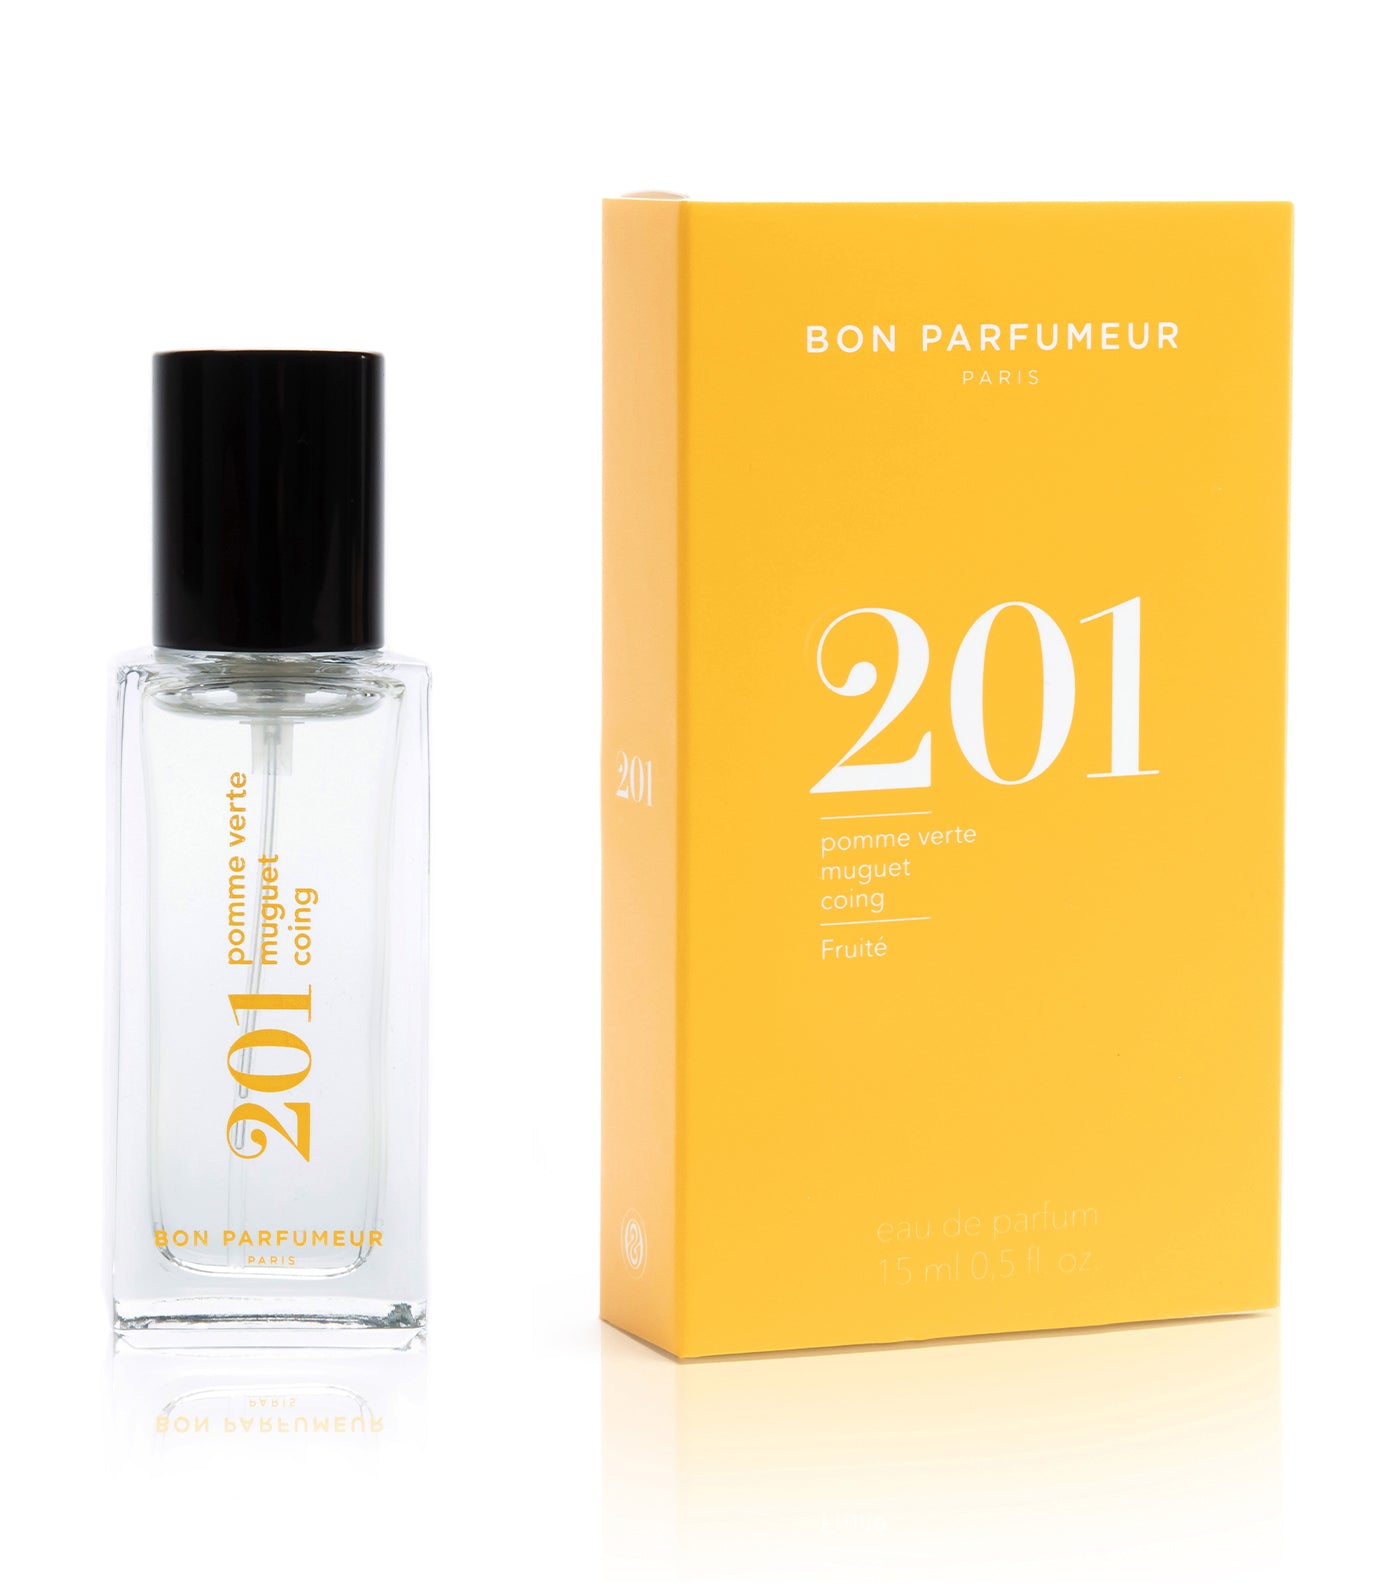 Eau de parfum 201 : green apple, lily-of-the-valley and quince